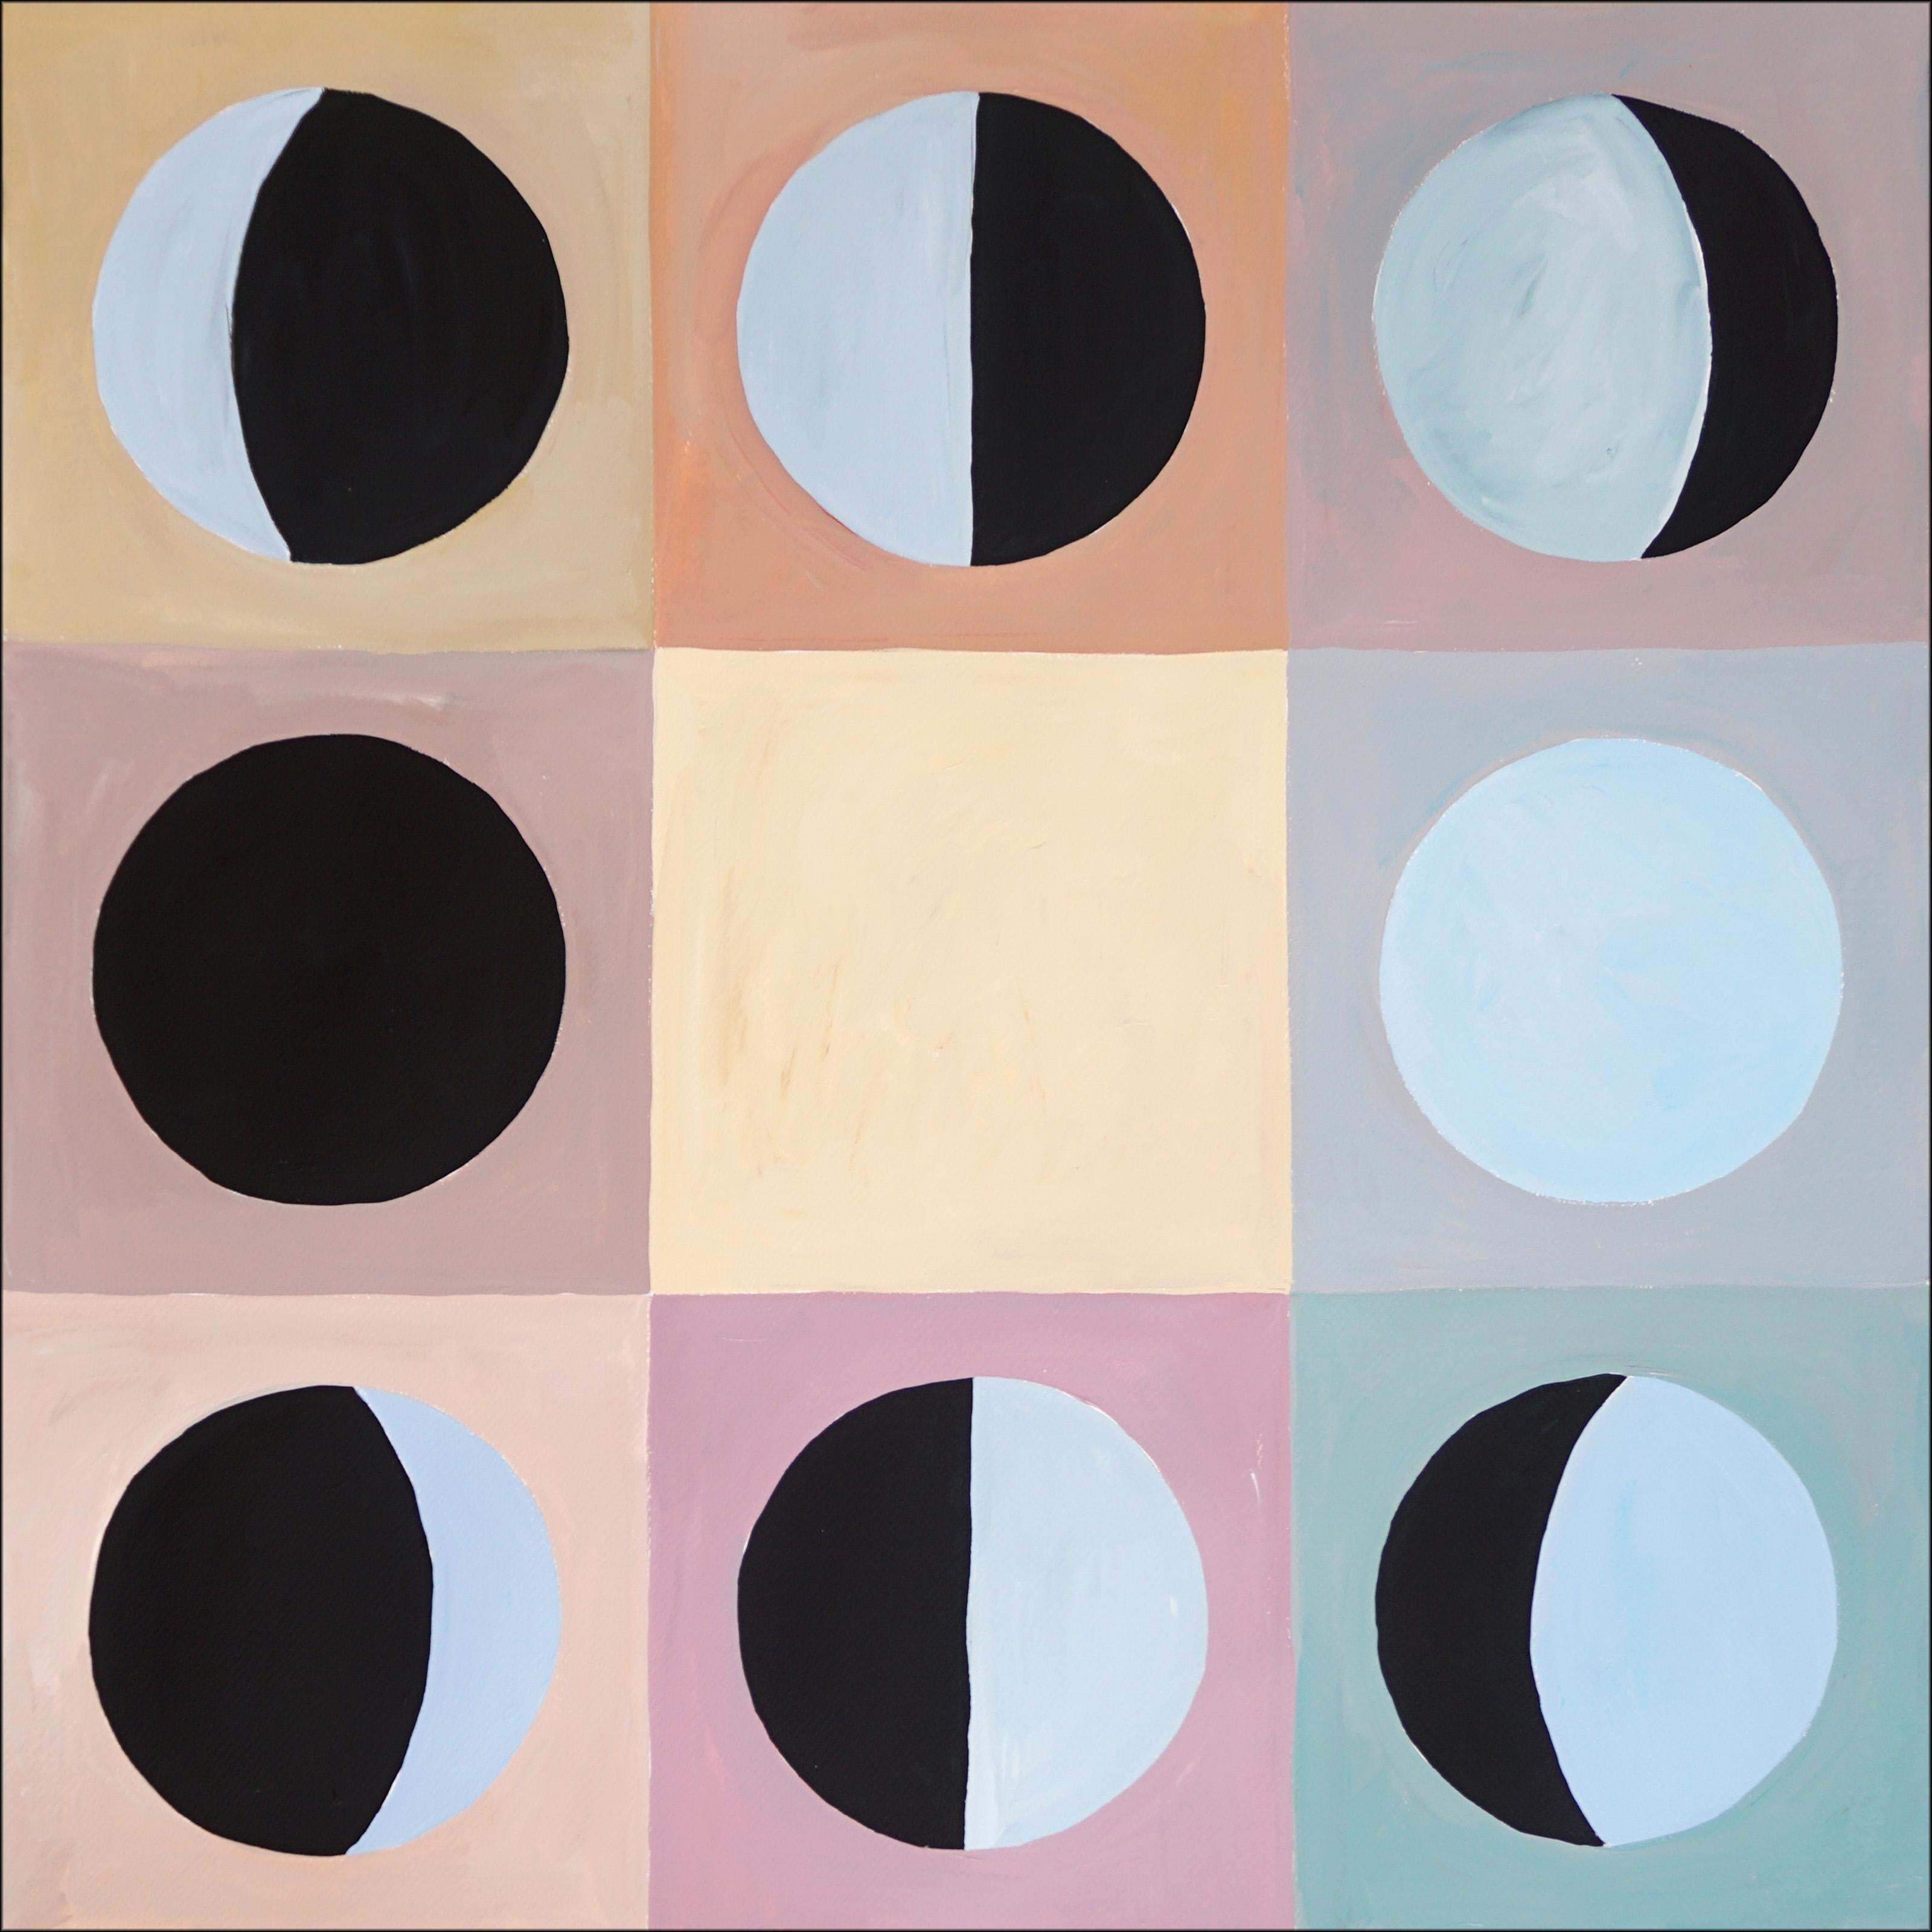 Natalia Roman Abstract Painting - Moon Phase in Pastel Tones Checkers, Geometric Grid, Pink, Blue, Black Astronomy